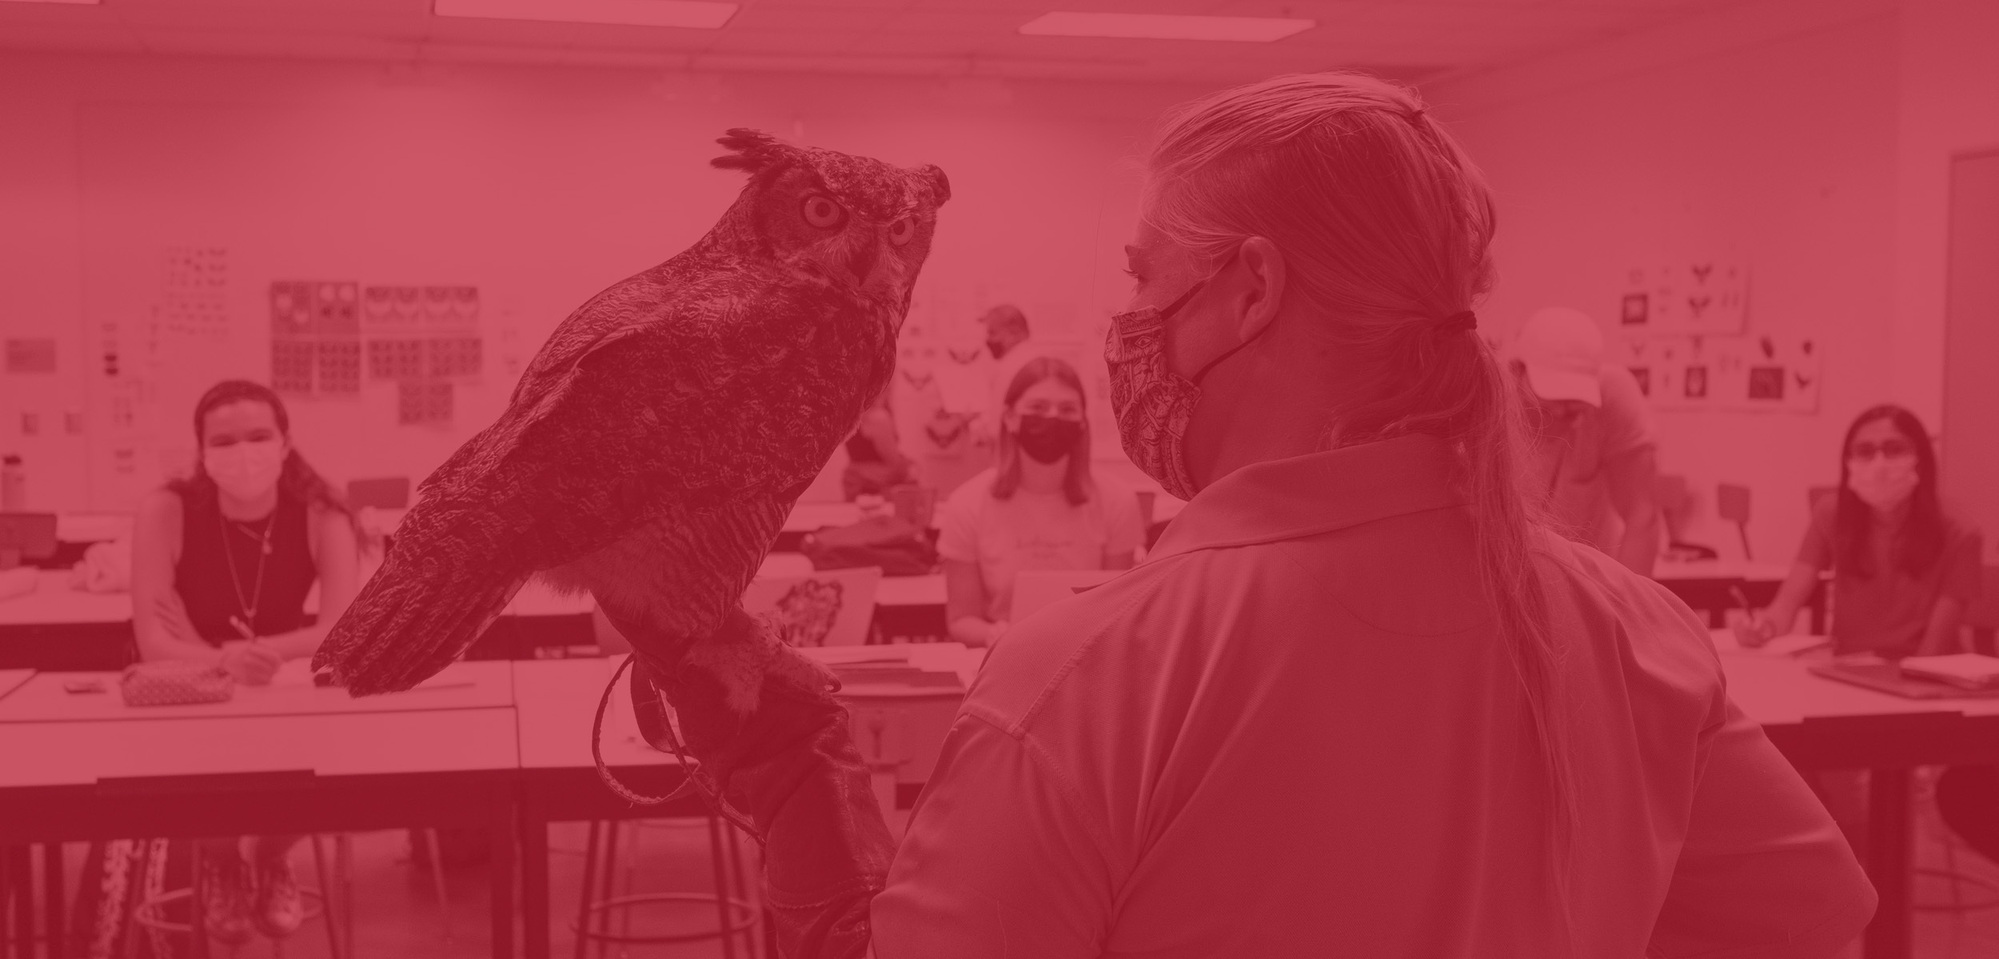 Zoo keeper holding owl in classroom